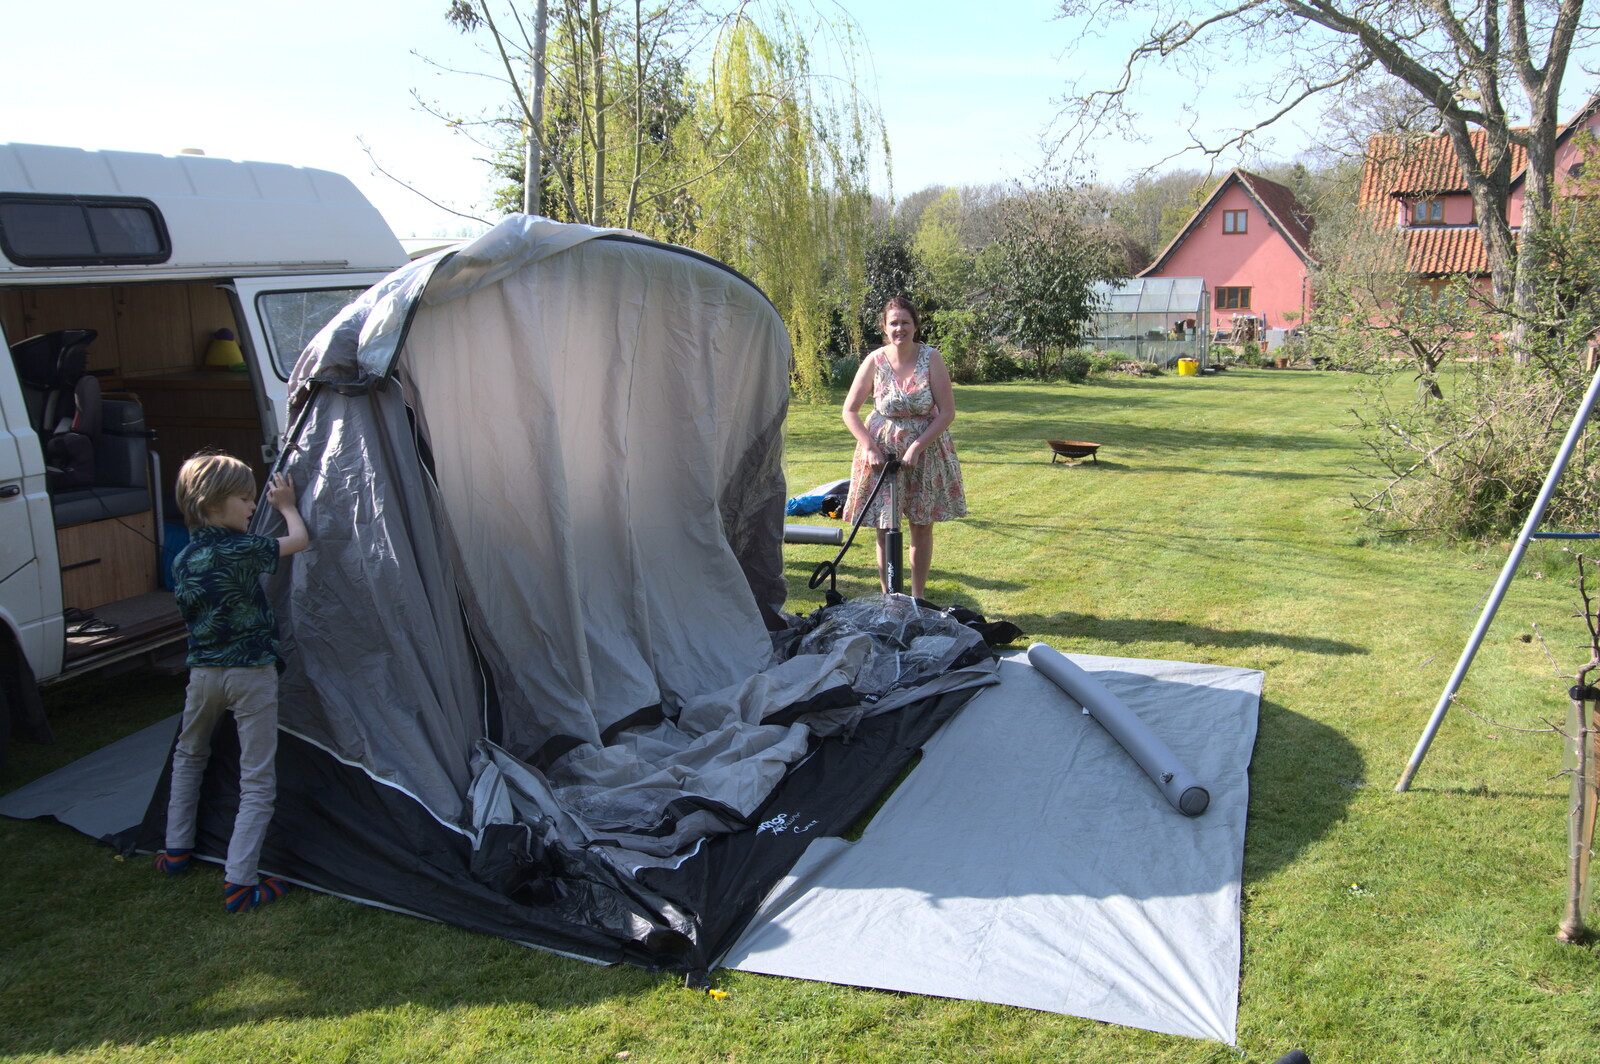 Isobel pumps the awning up from A Weekend Camping Trip in the Garden, Brome, Suffolk - 11th April 2020